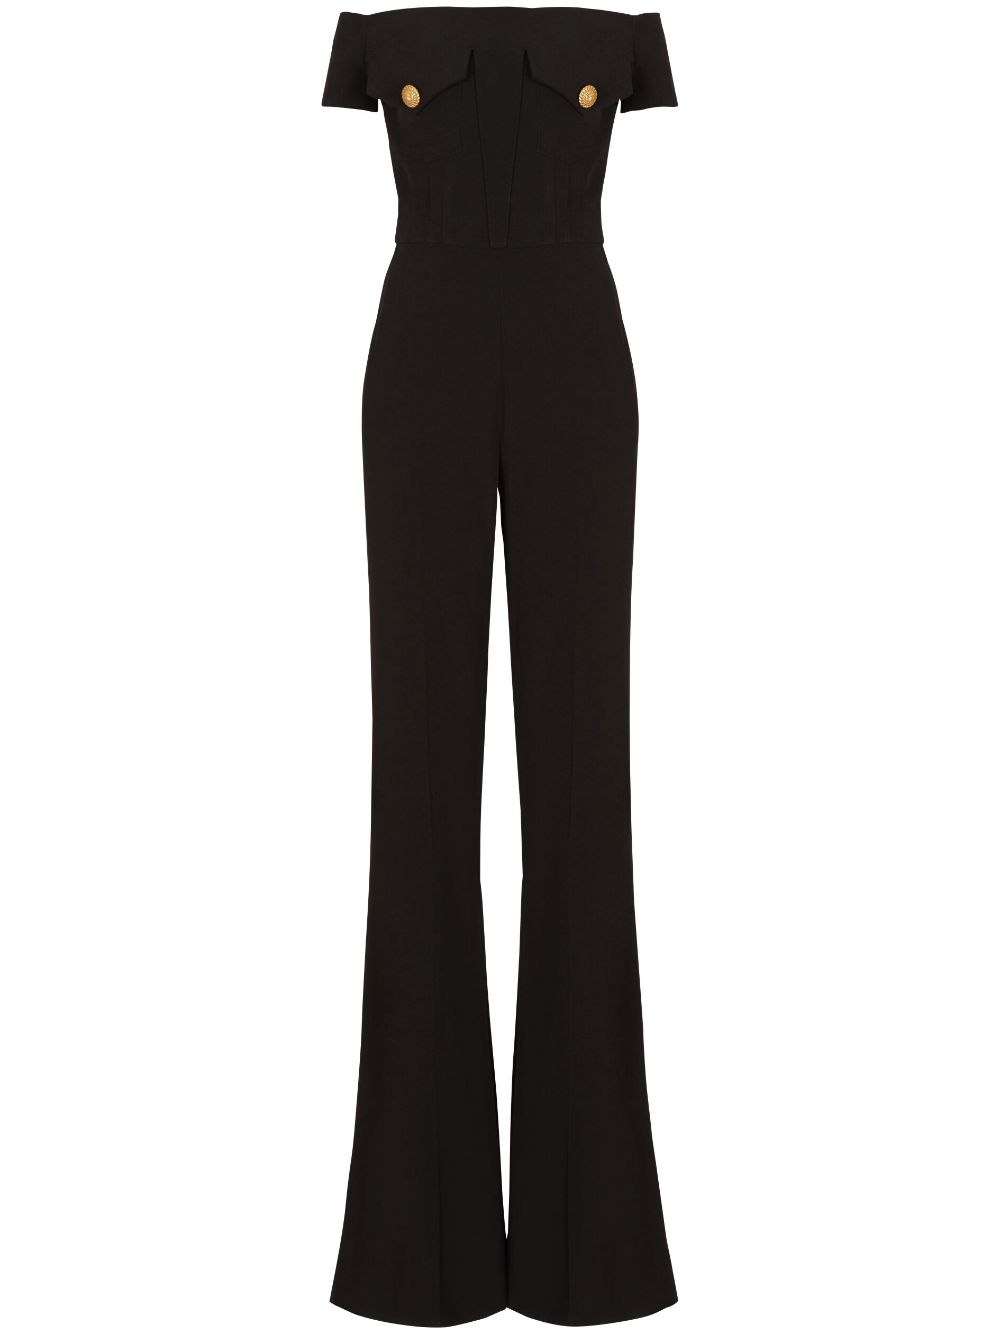 BALMAIN Black Pleated Jumpsuit with Gold-Tone Details for Women